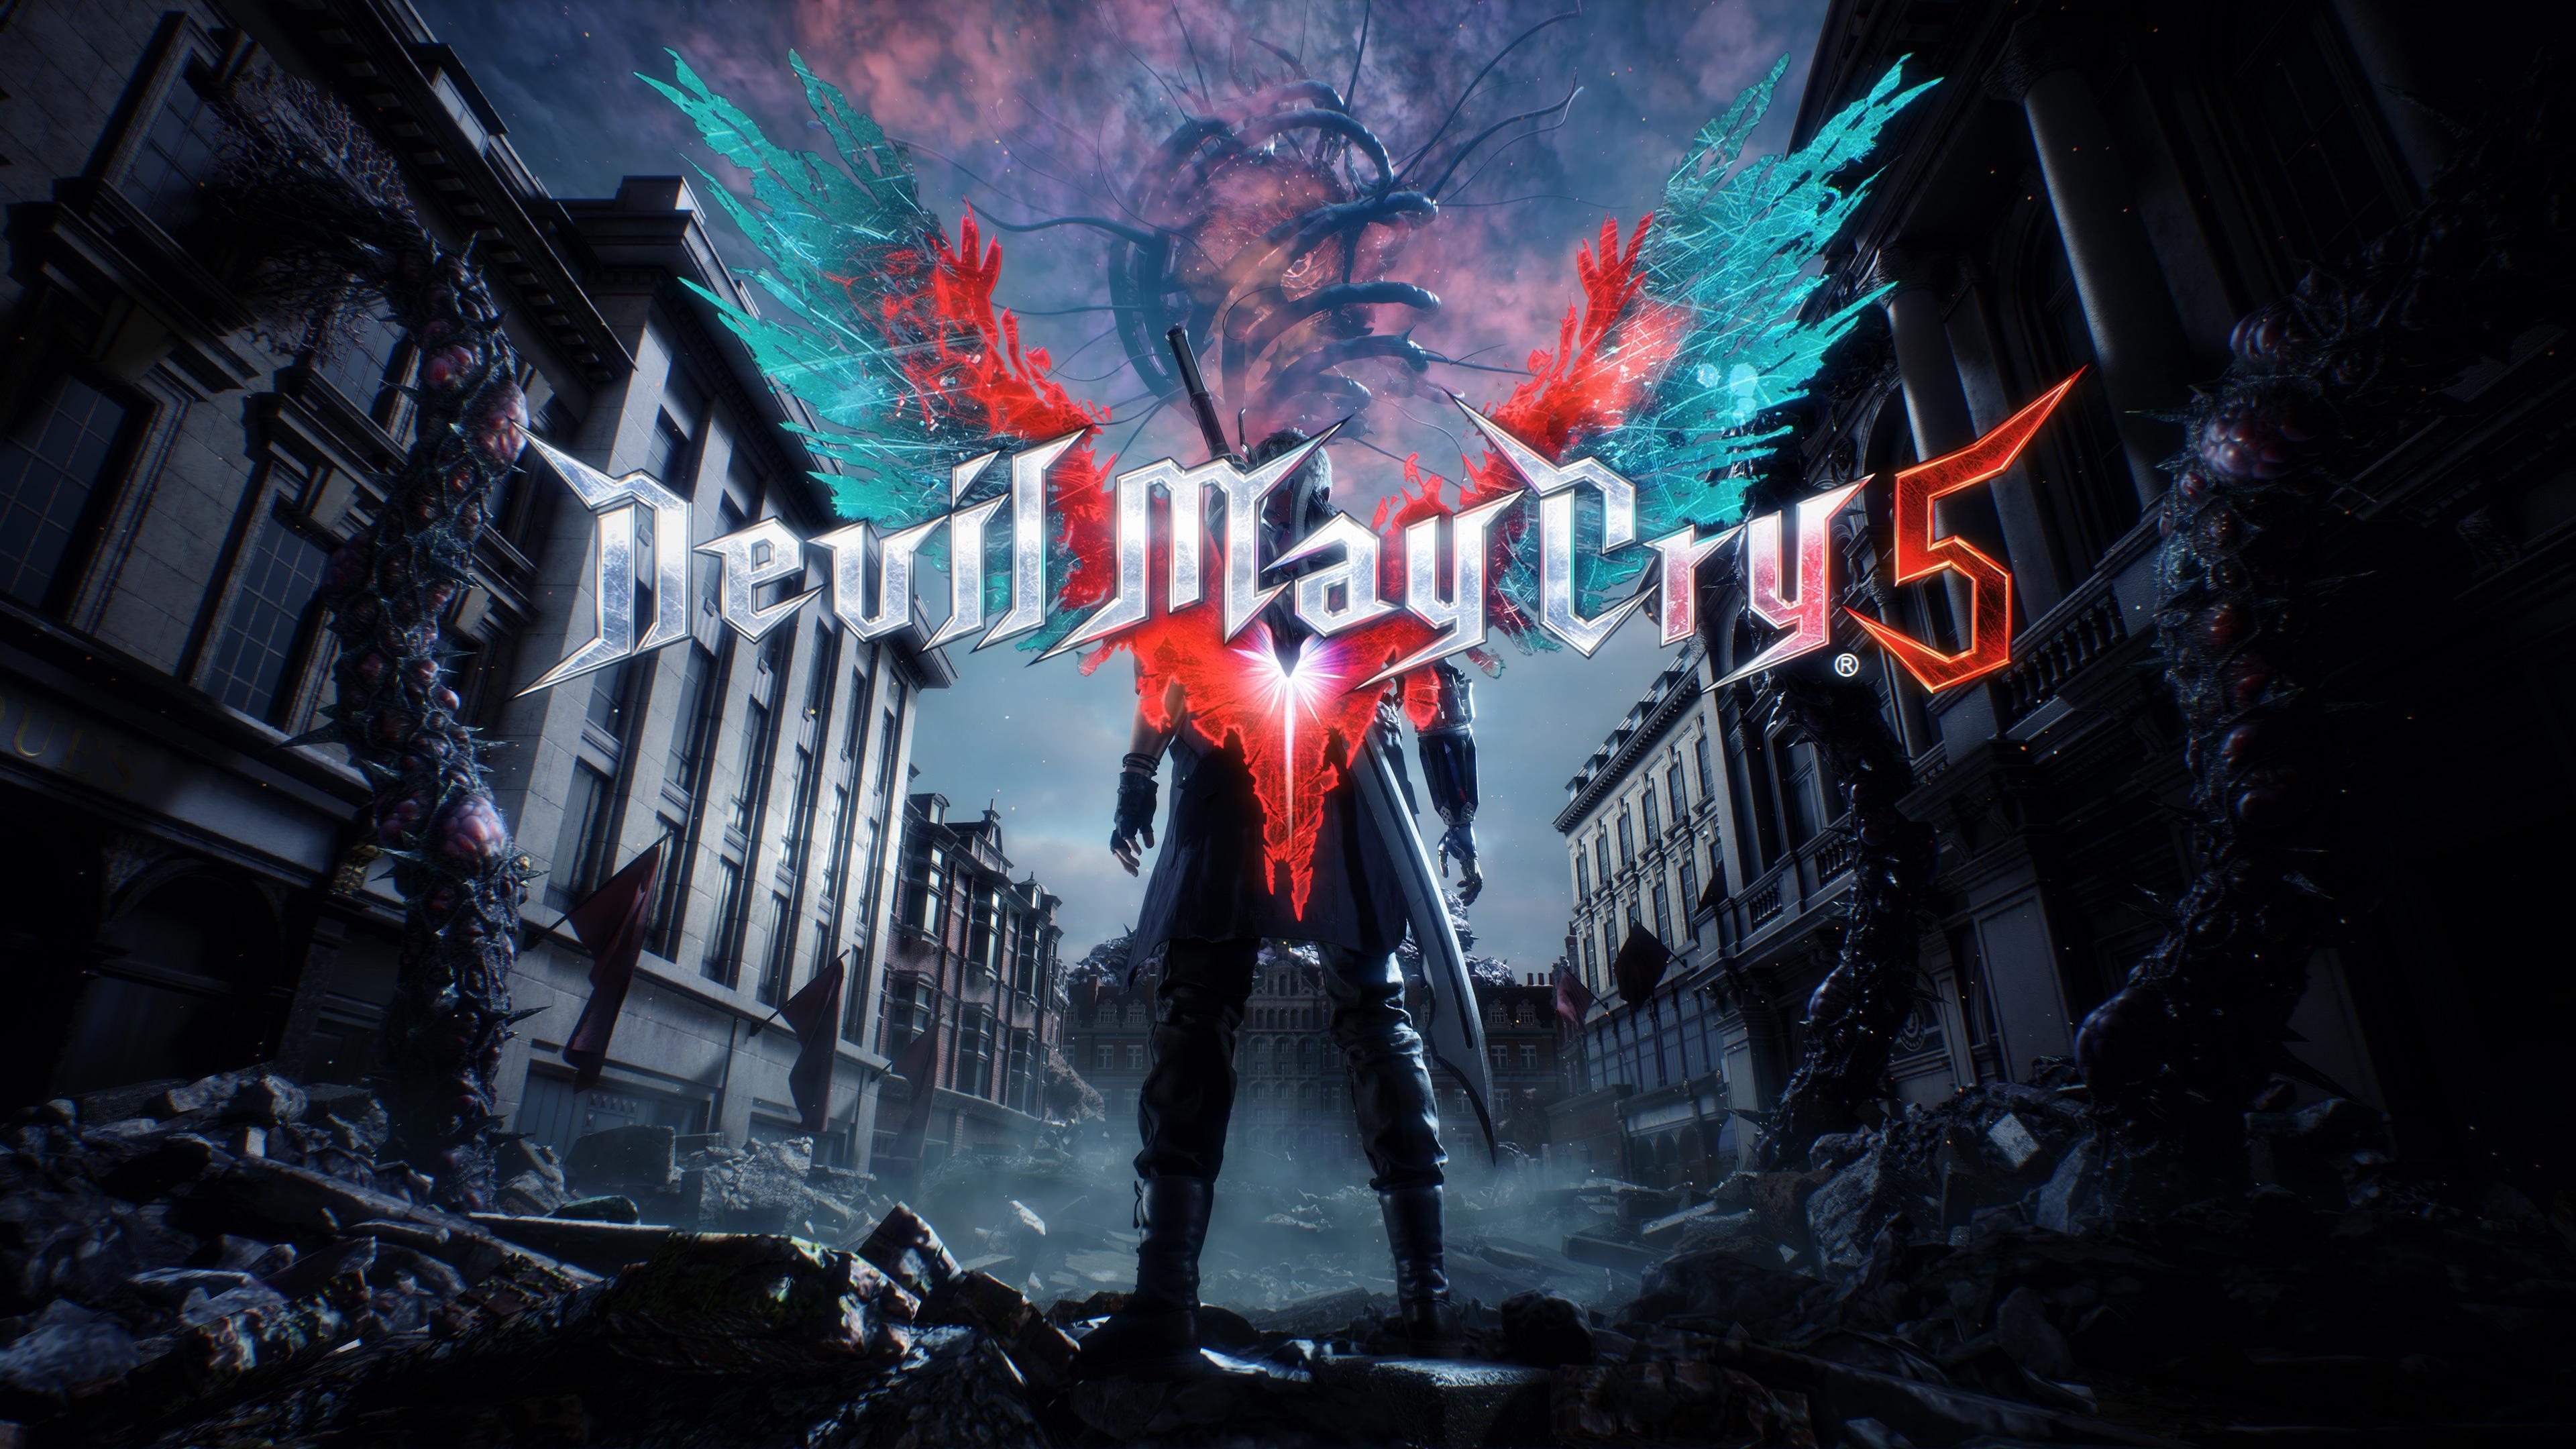 Download wallpapers and images devil may cry 5, dmc, dante, kat